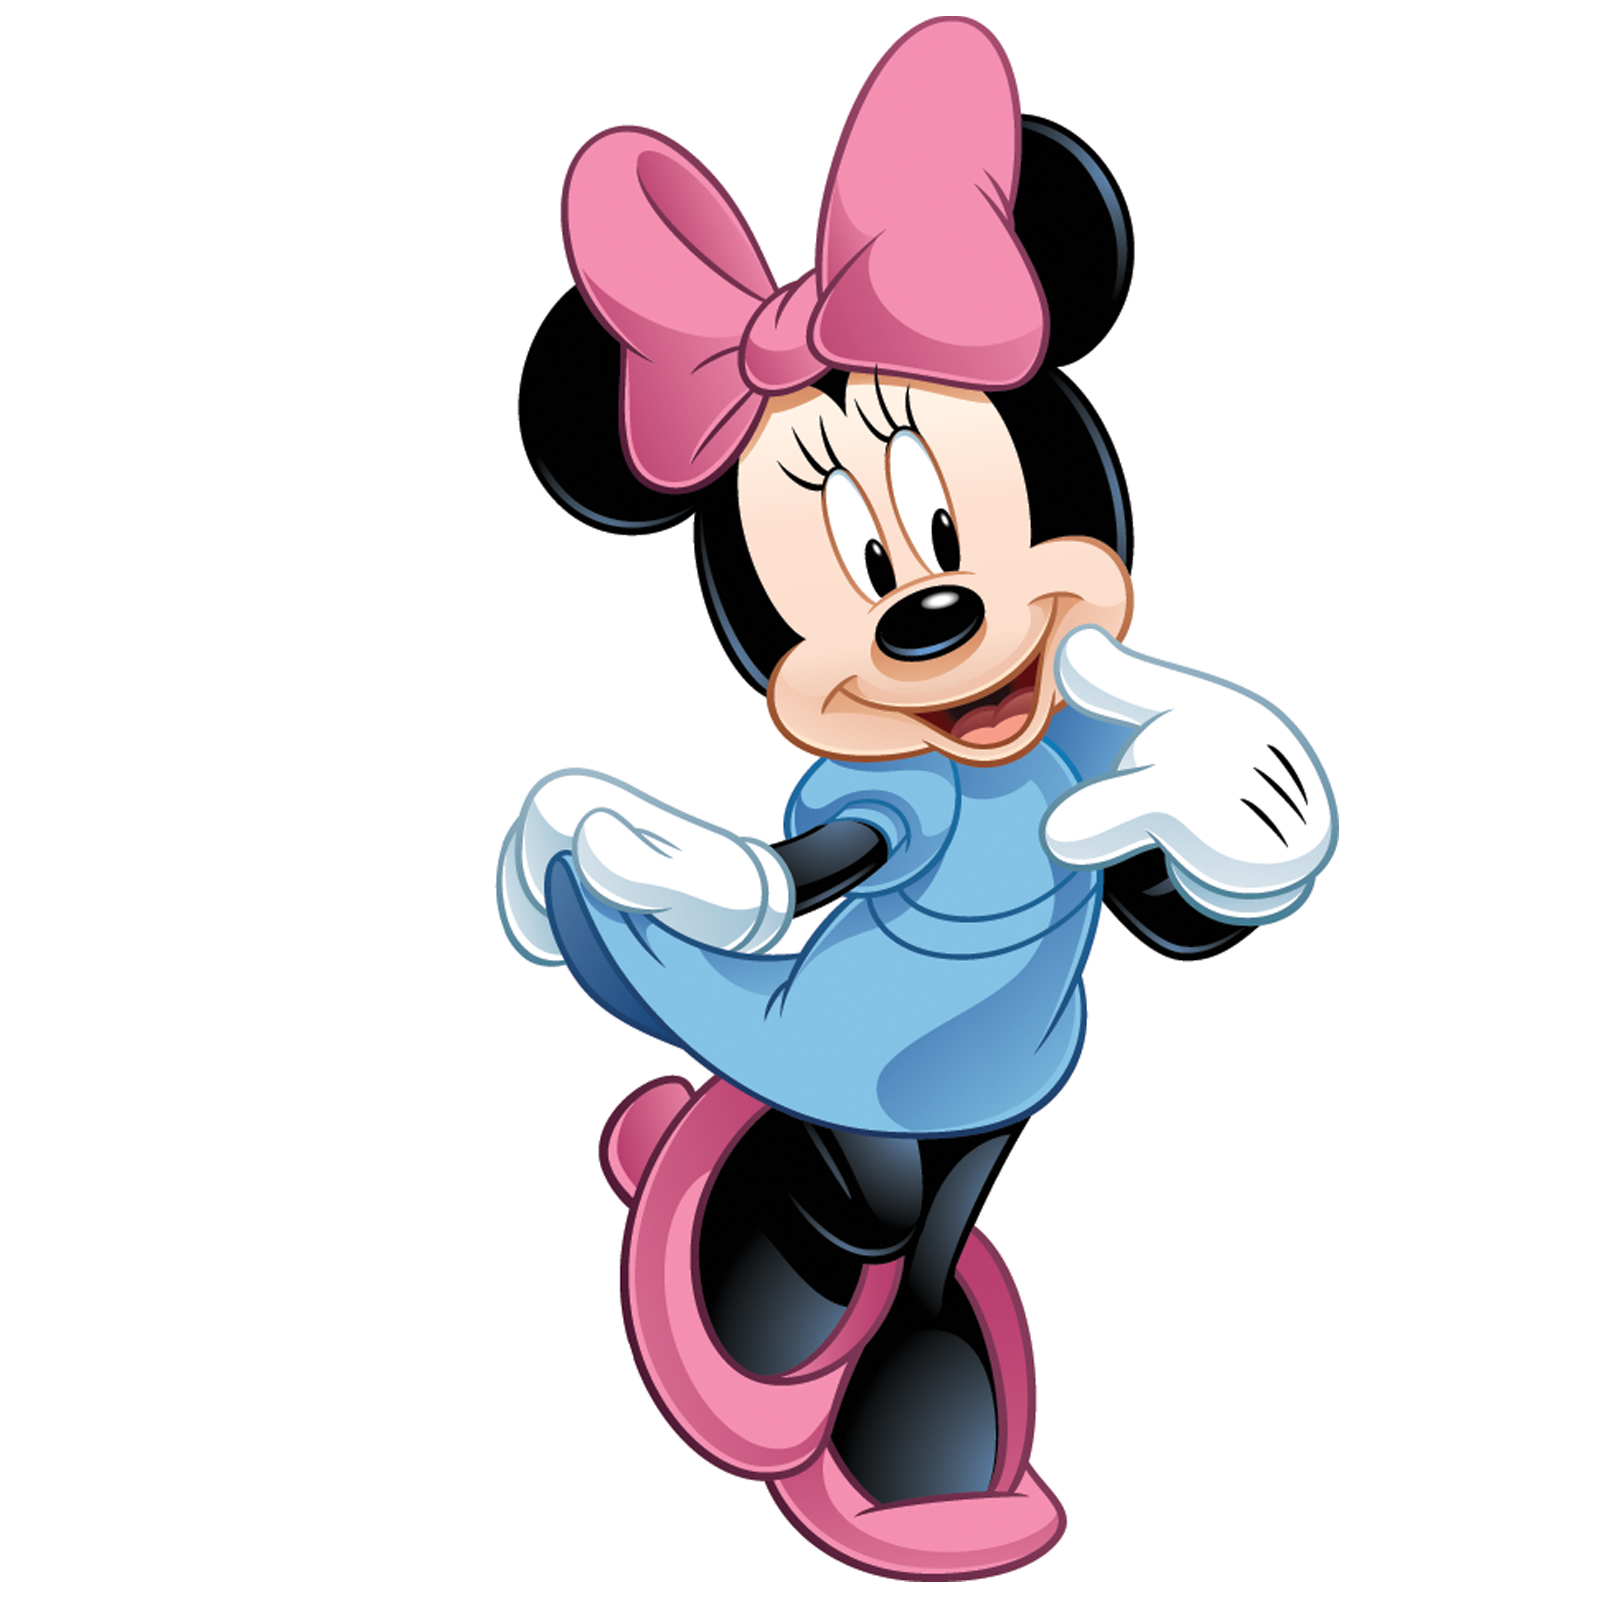 Wallpapers Baby Minnie Mouse Rideaux Disney Girly H M Vente D ...